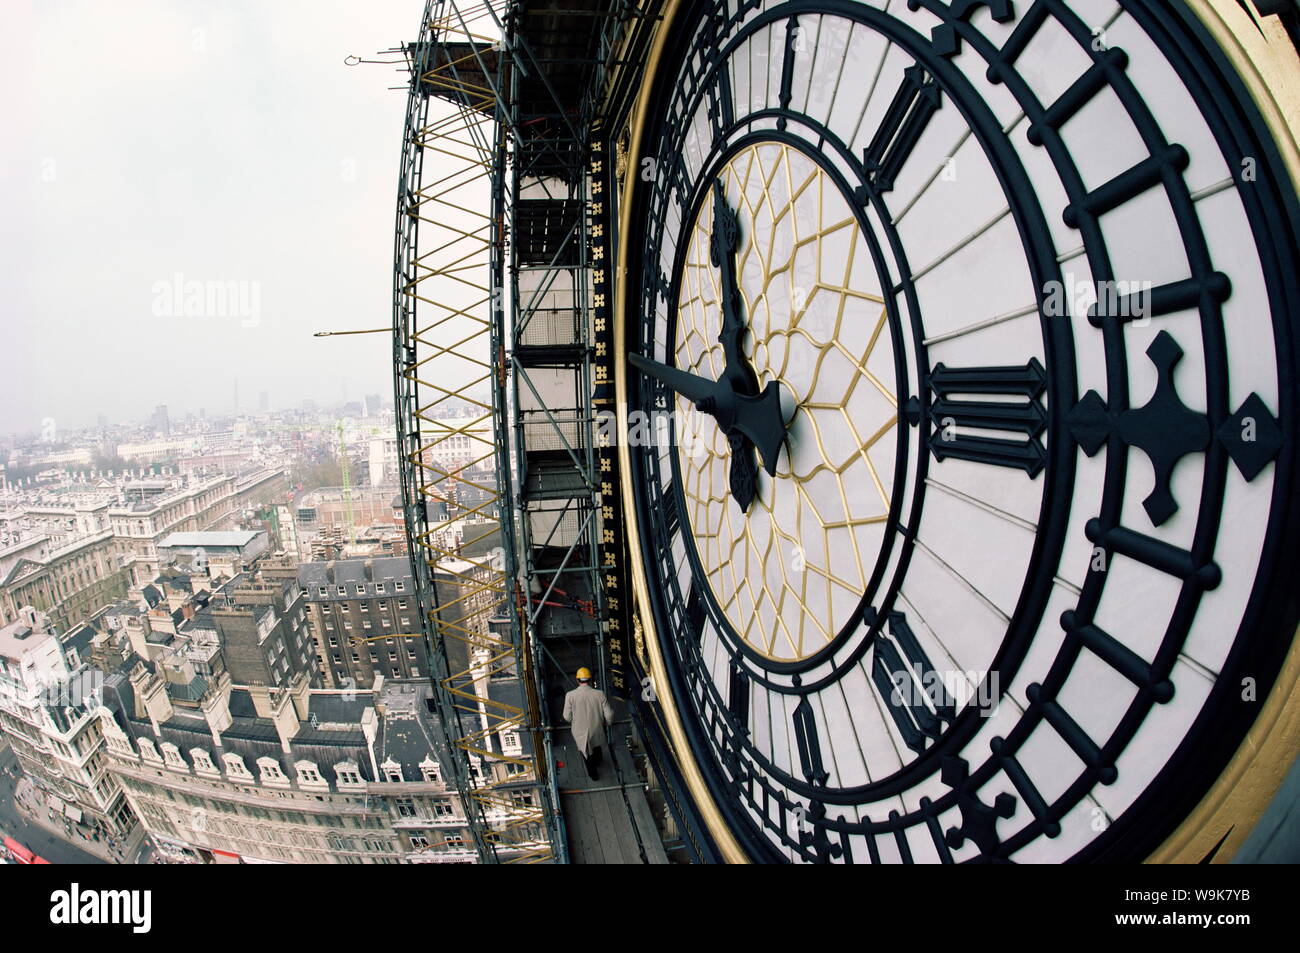 Close-up of the clock face of Big Ben, Houses of Parliament, Westminster, London, England, United Kingdom, Europe Stock Photo